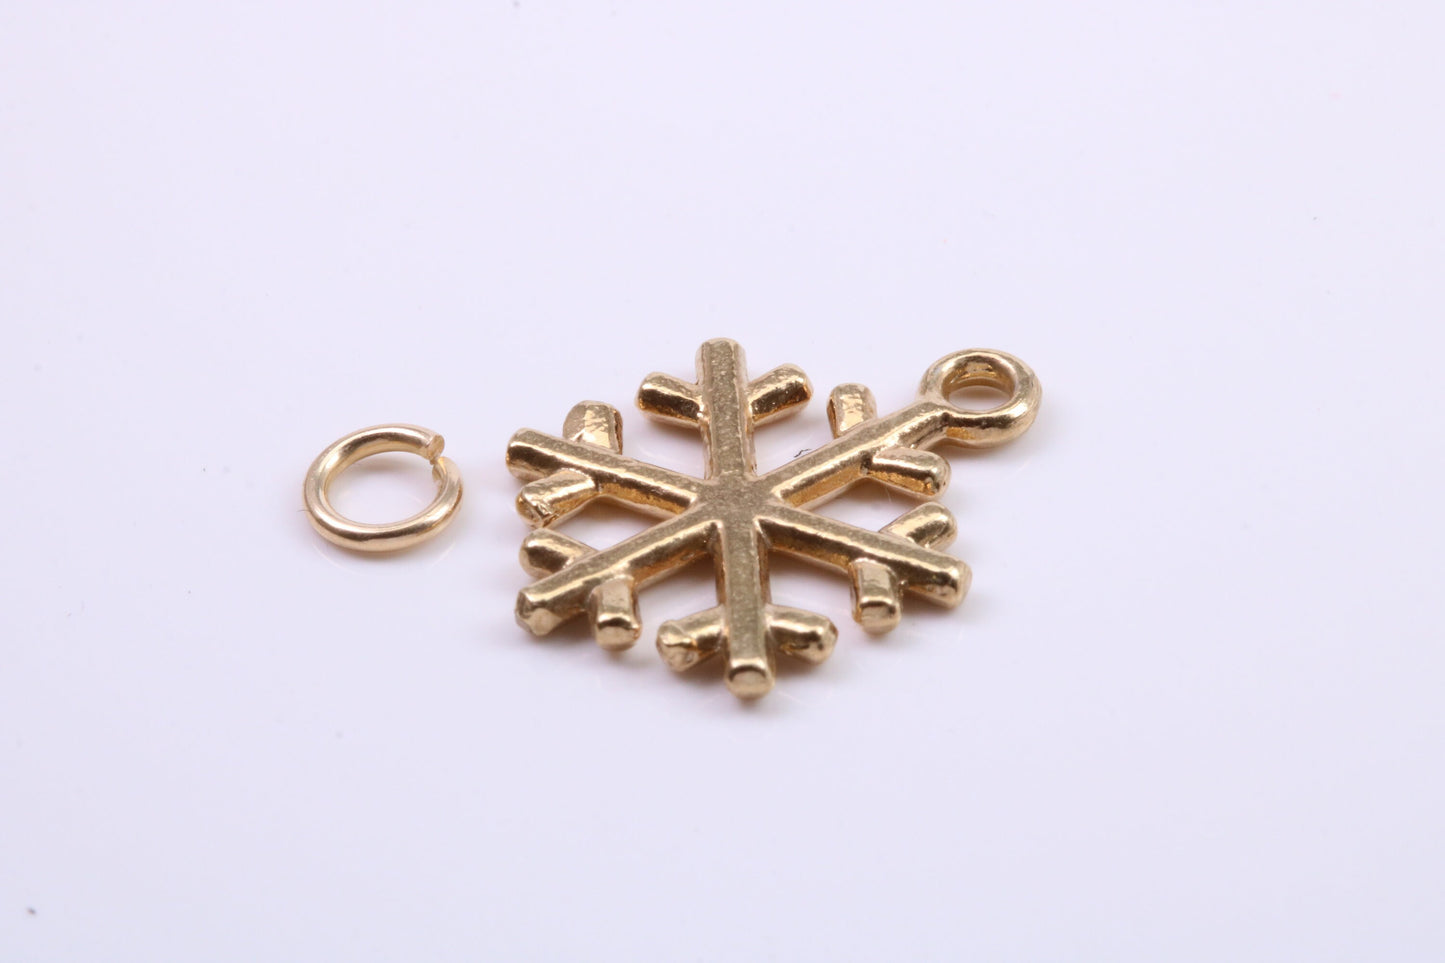 Snow Flake Charm, Traditional Charm, Made from Solid 9ct Yellow Gold, British Hallmarked, Complete with Attachment Link